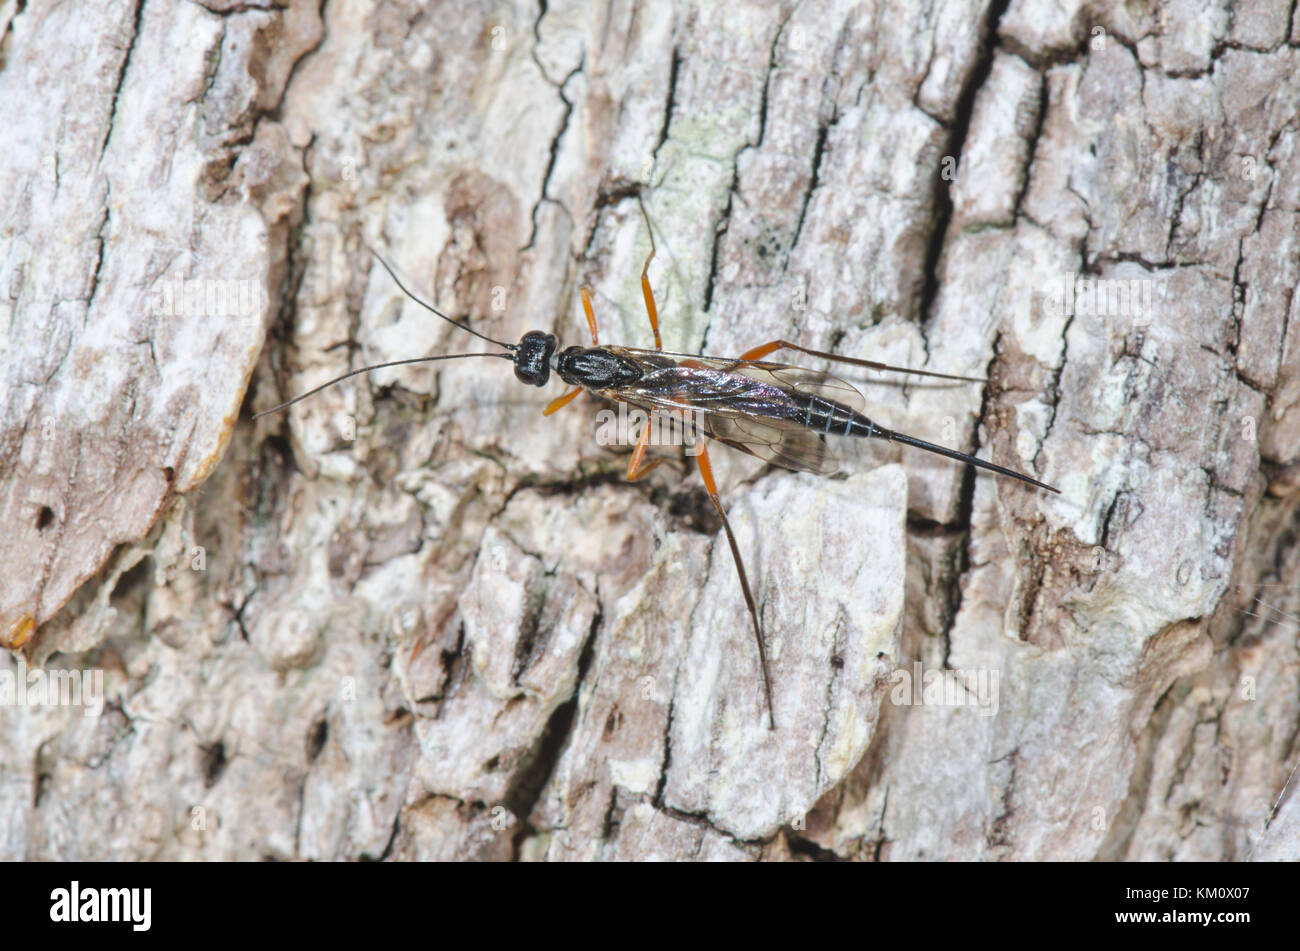 Female Ichneumonid Darwin Wasp searching for host in dead wood. Sussex, UK Stock Photo